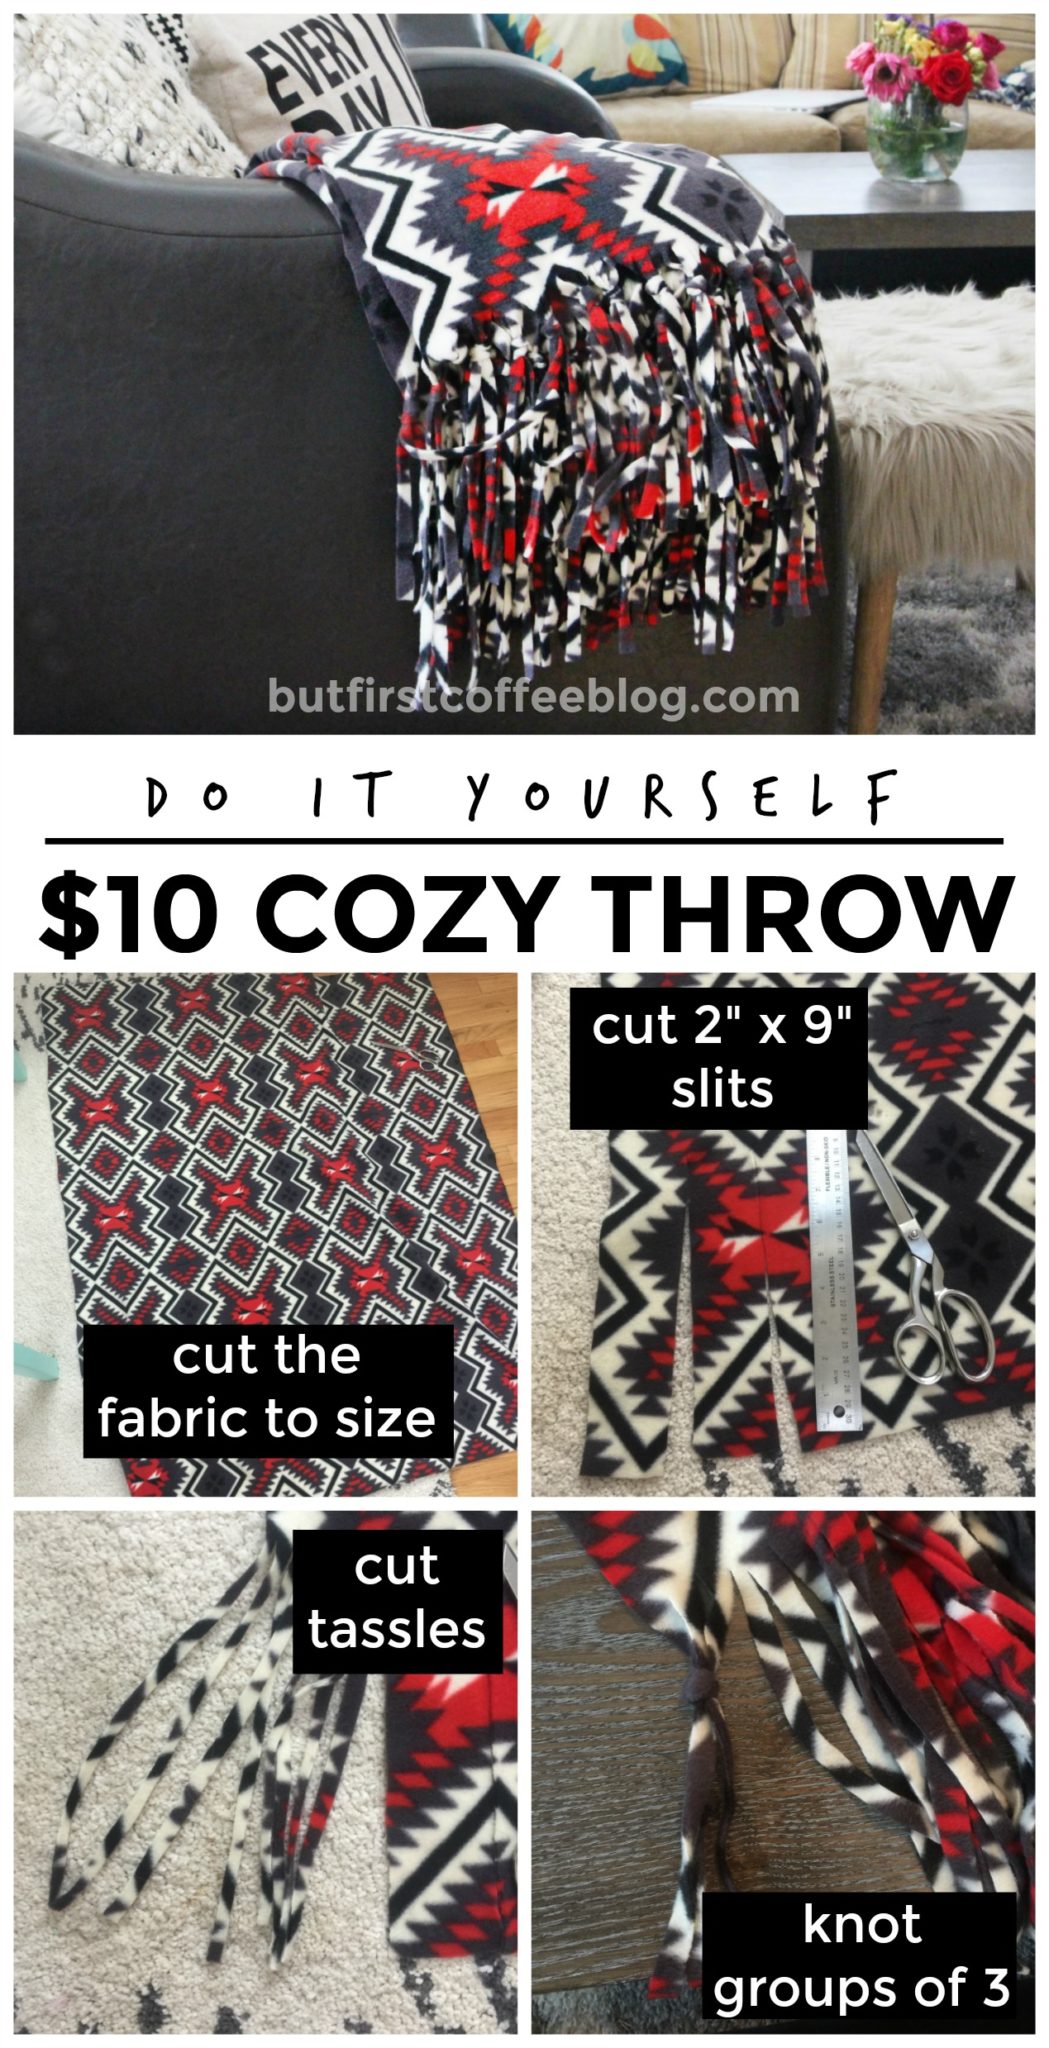 How to Make a Cozy, No Sew Throw Blanket Tutorial